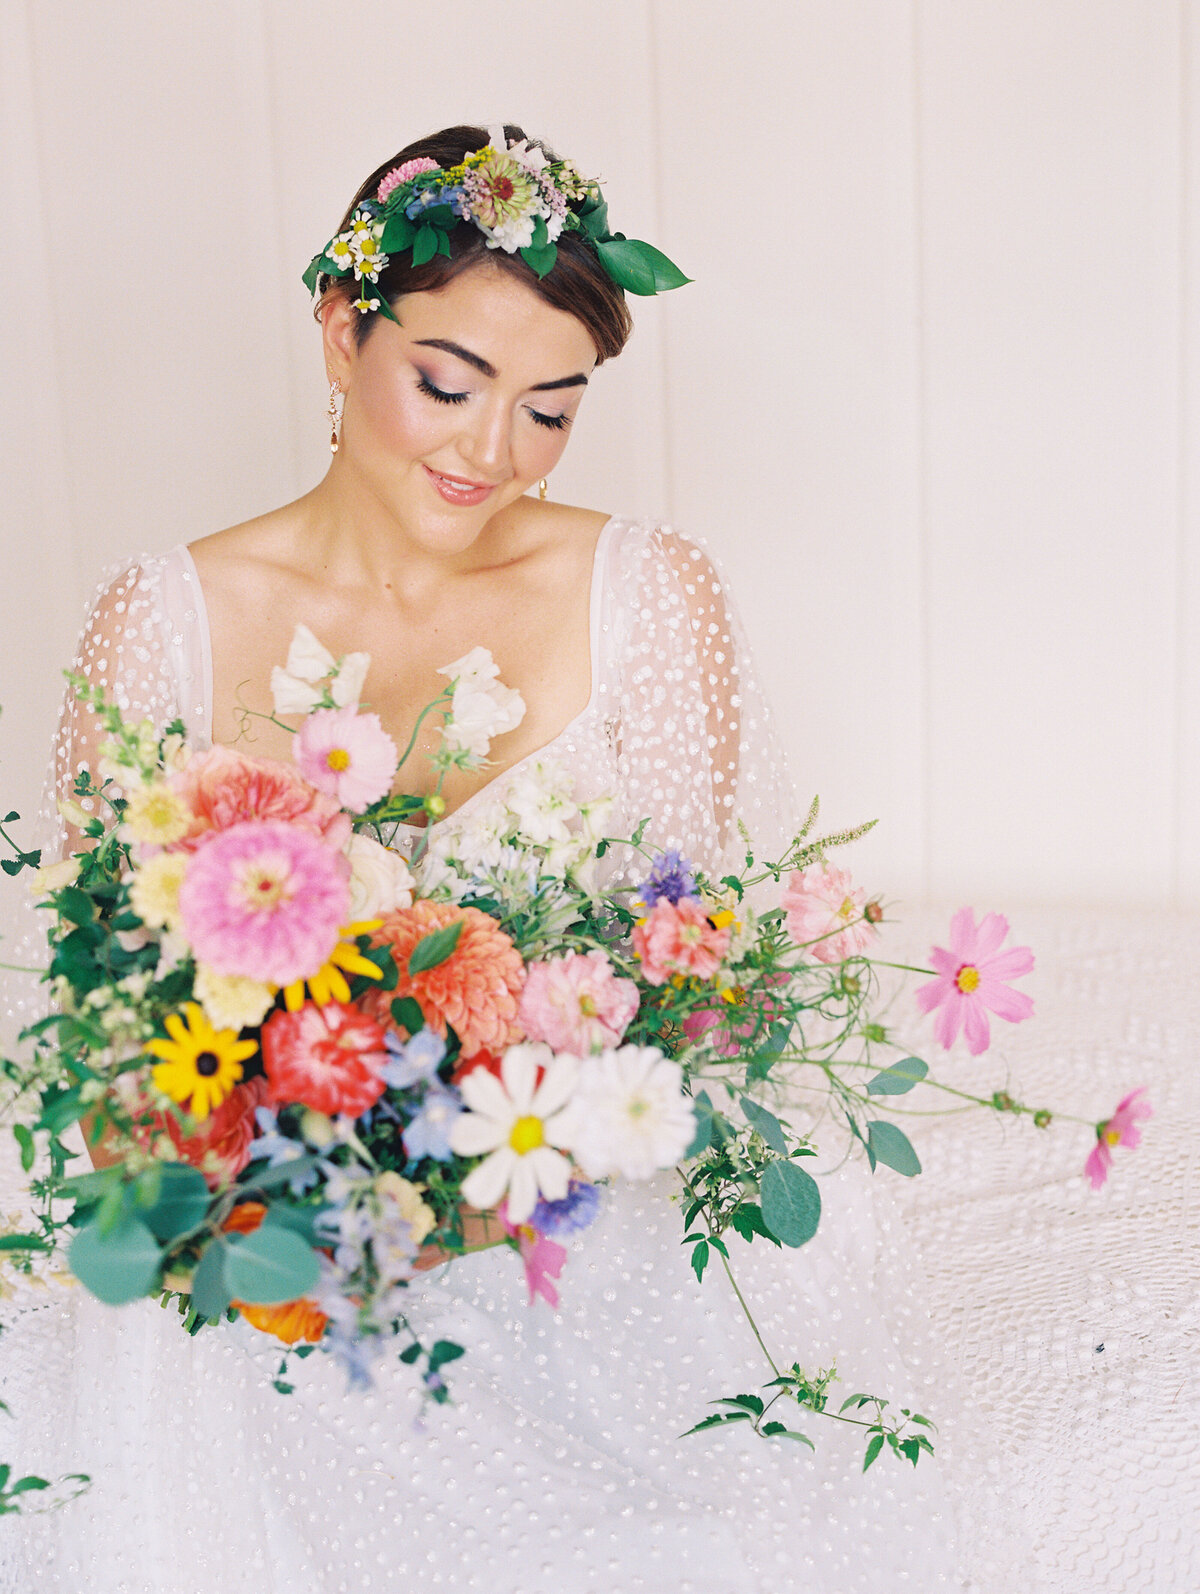 Bride holding a colorful bridal bouquet with flower crown